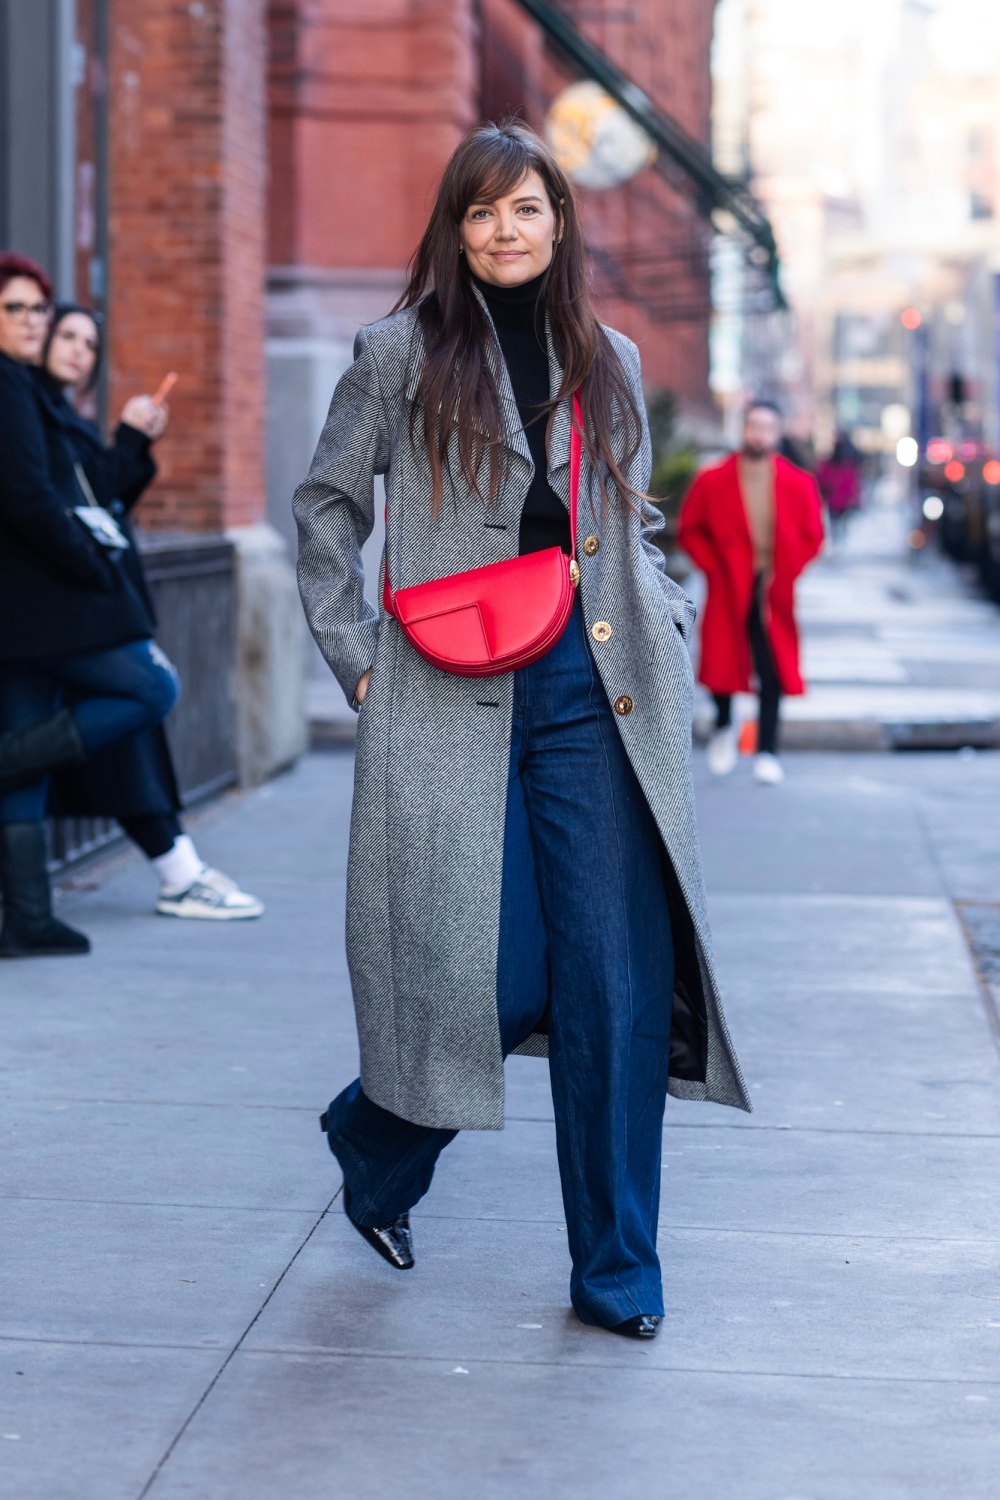 Katie Holmes Adds a Pop of Festive Red to a Neutral Winter Outfit